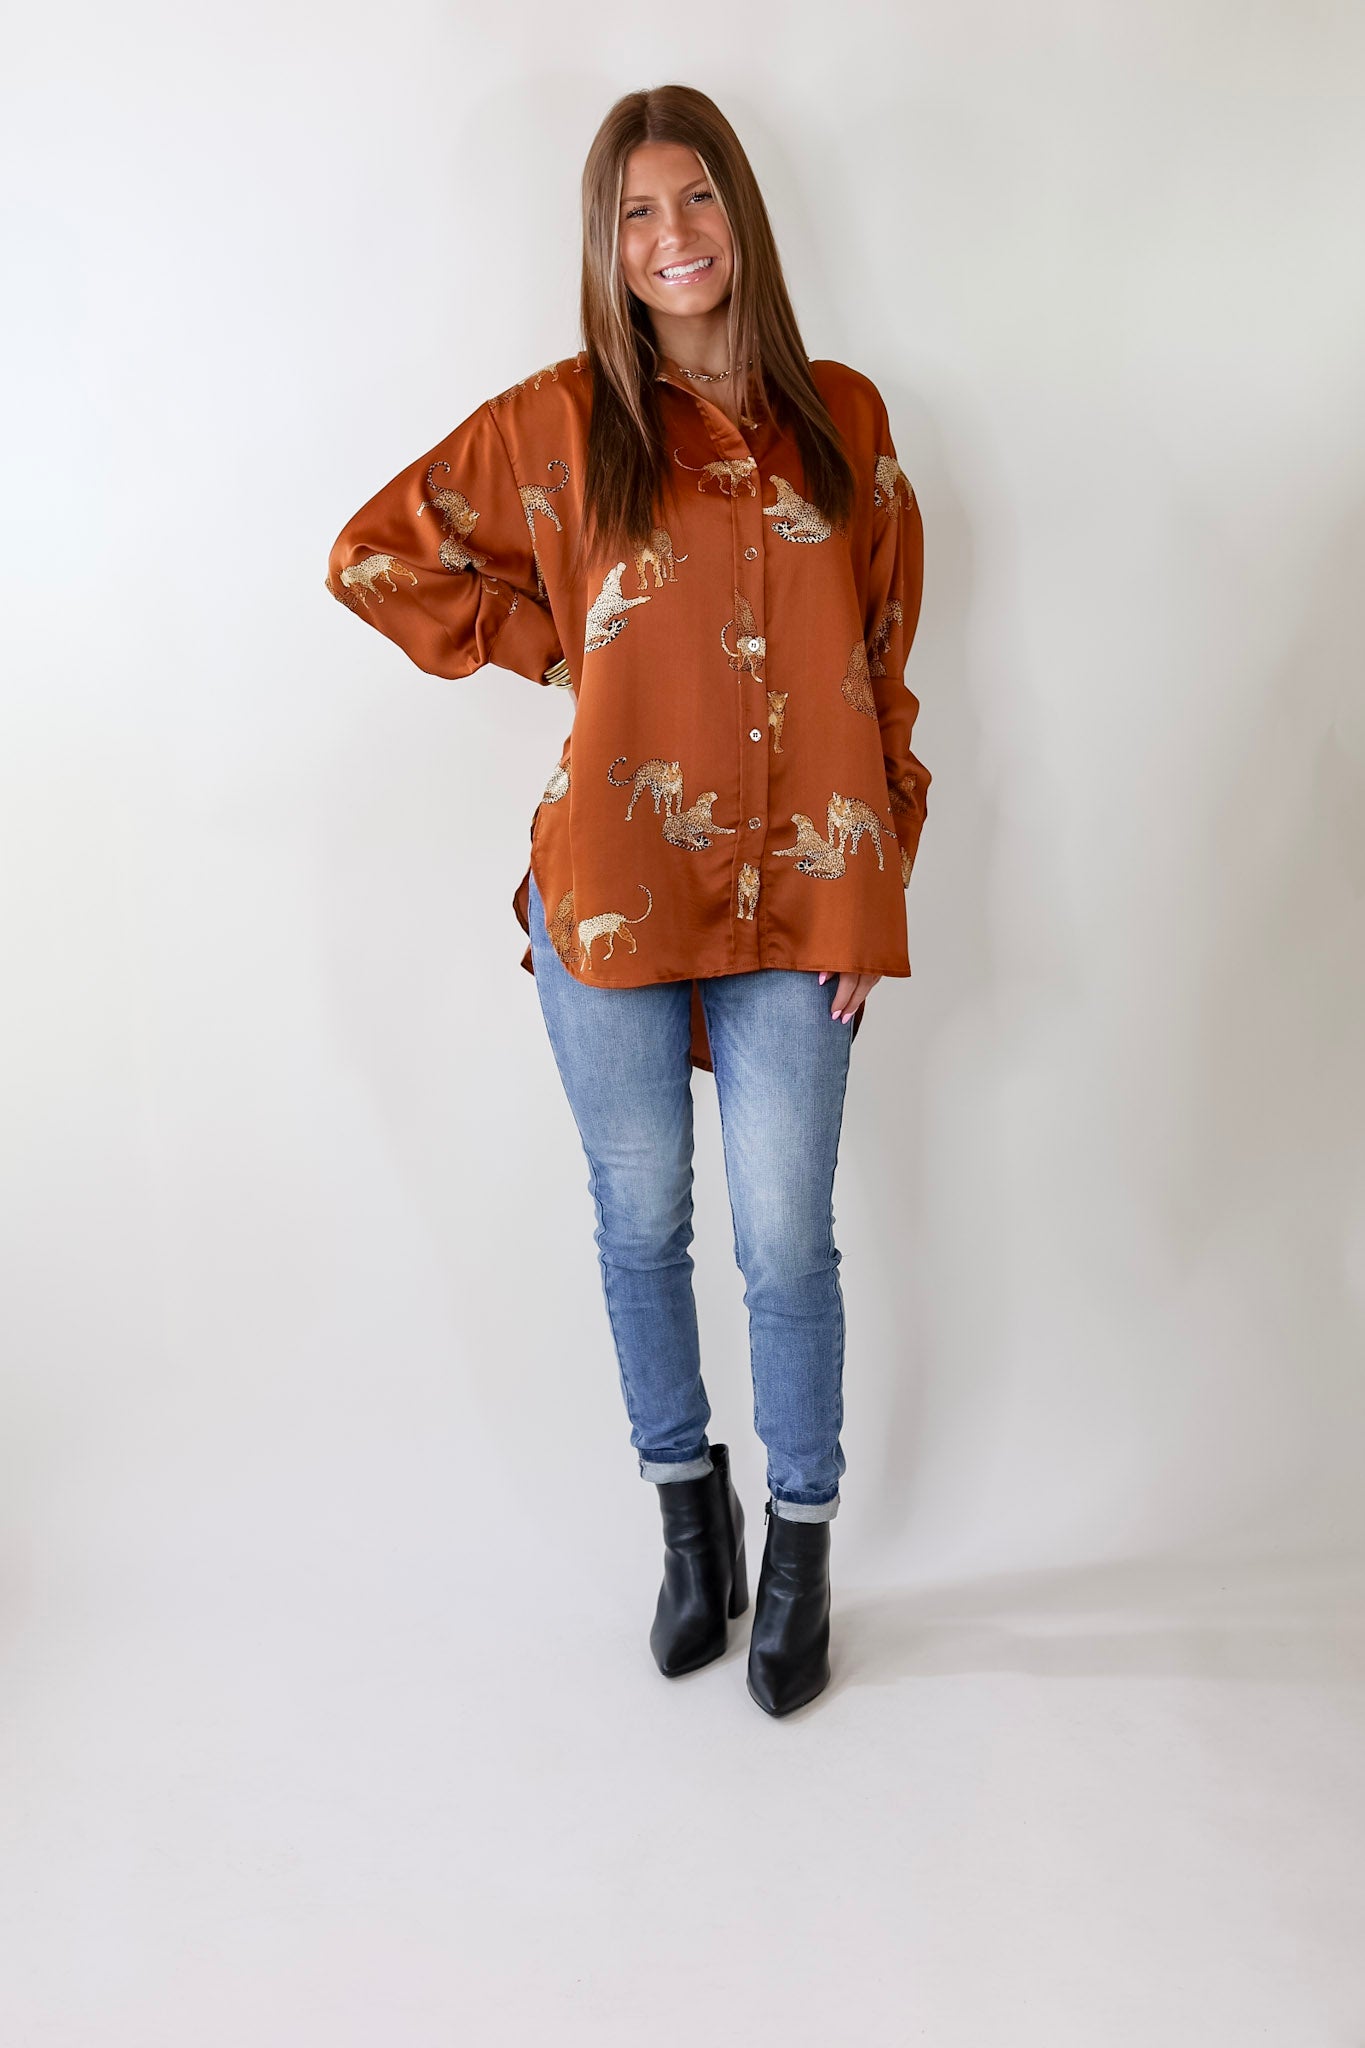 Tell Me Something Good Cheetah Print Long Sleeve Button Up Top in Camel Brown